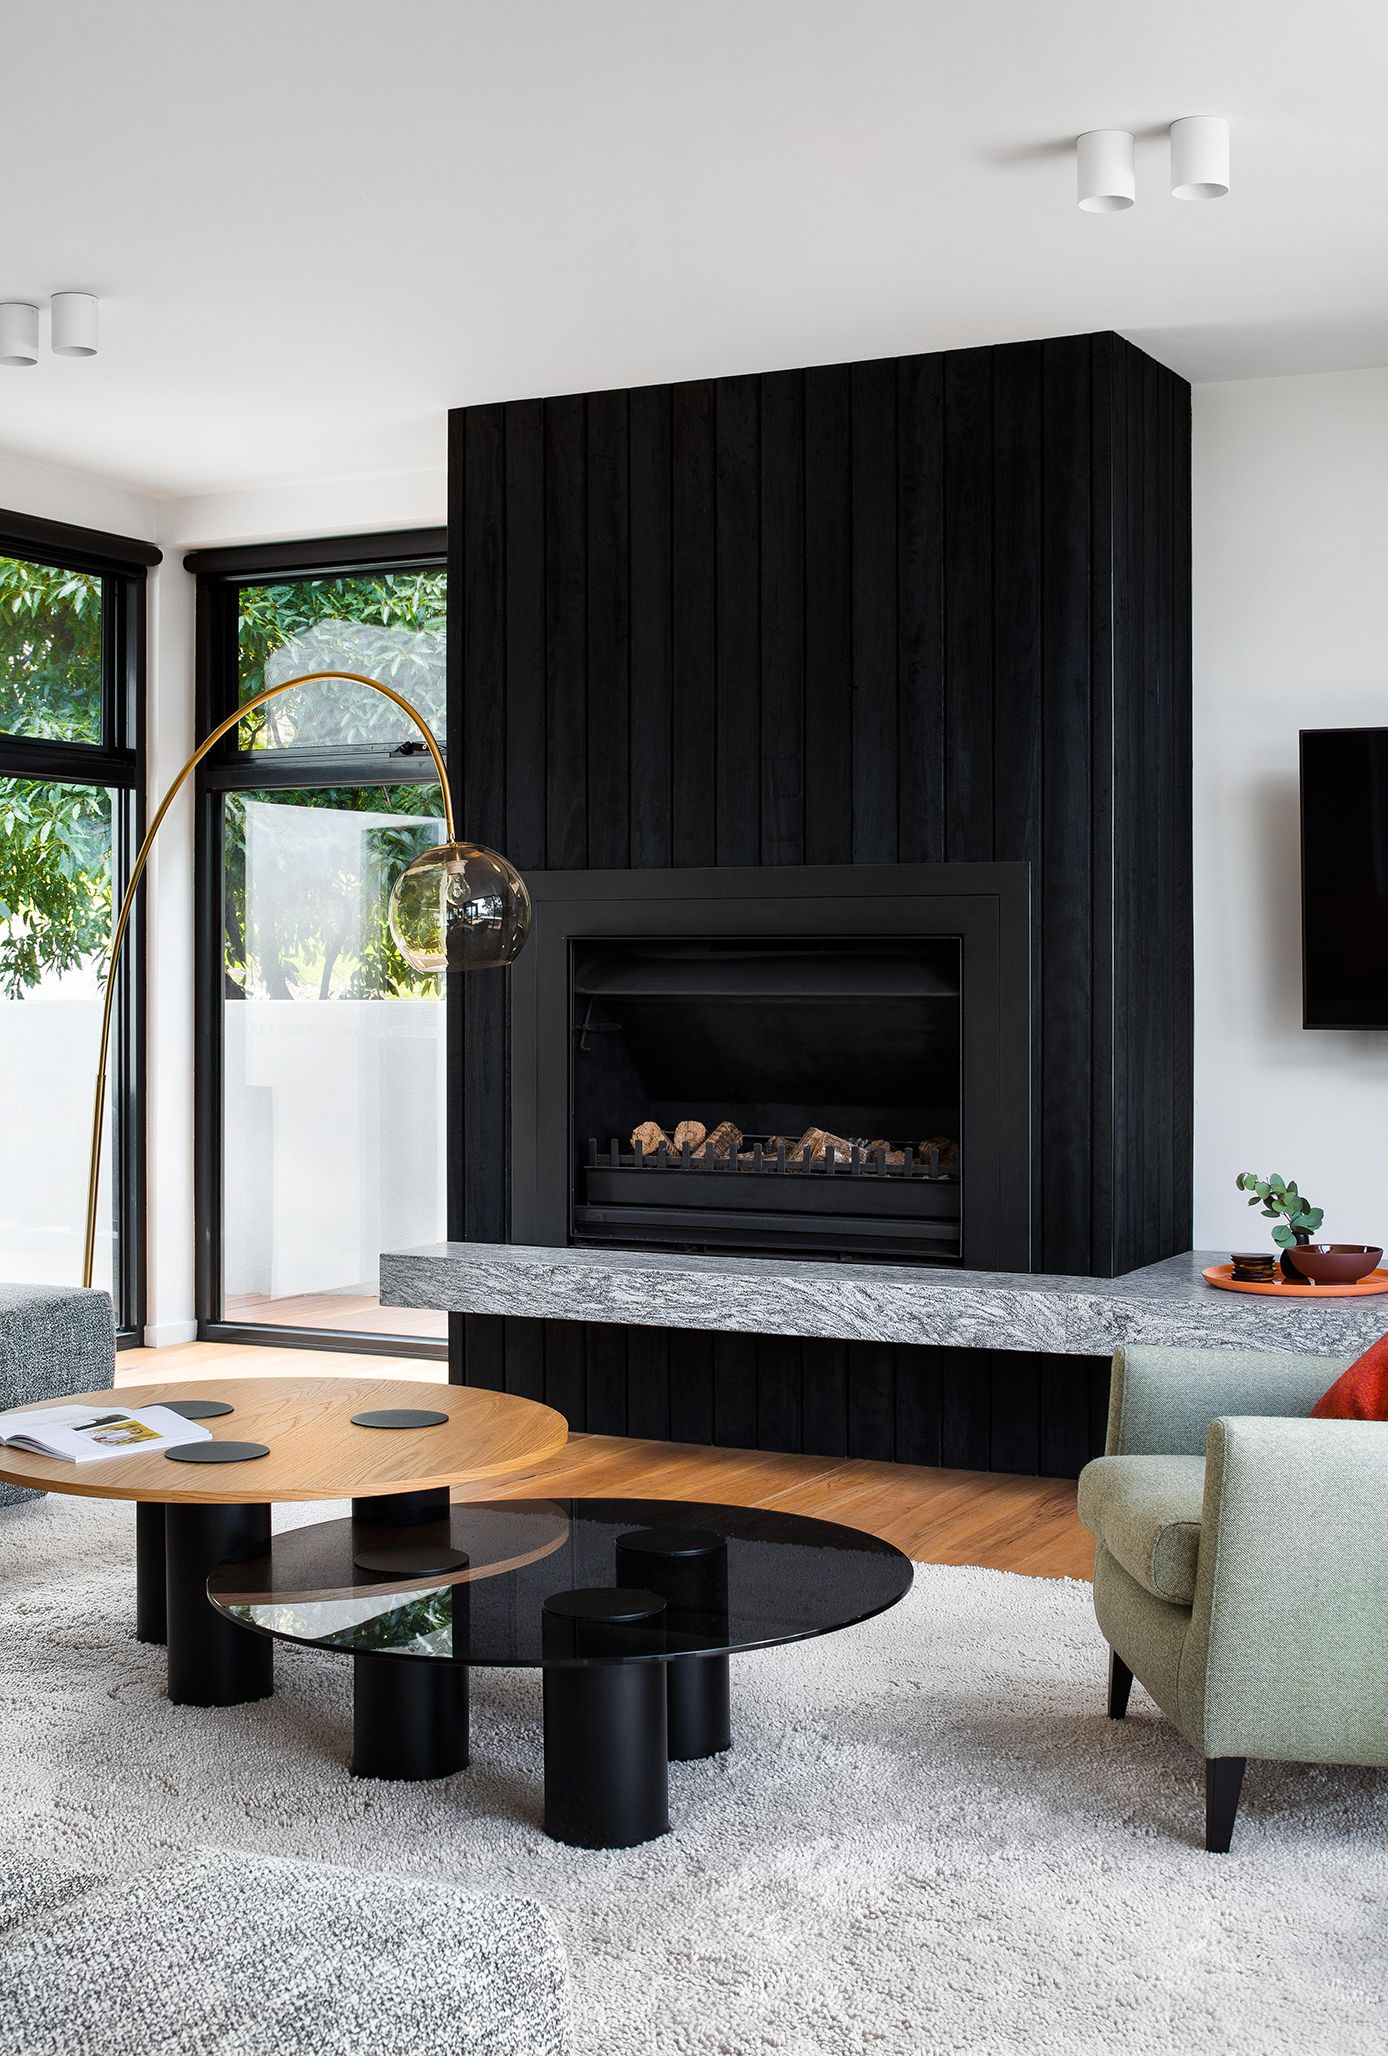 image of Lorne Beach House - charred timber wood fire